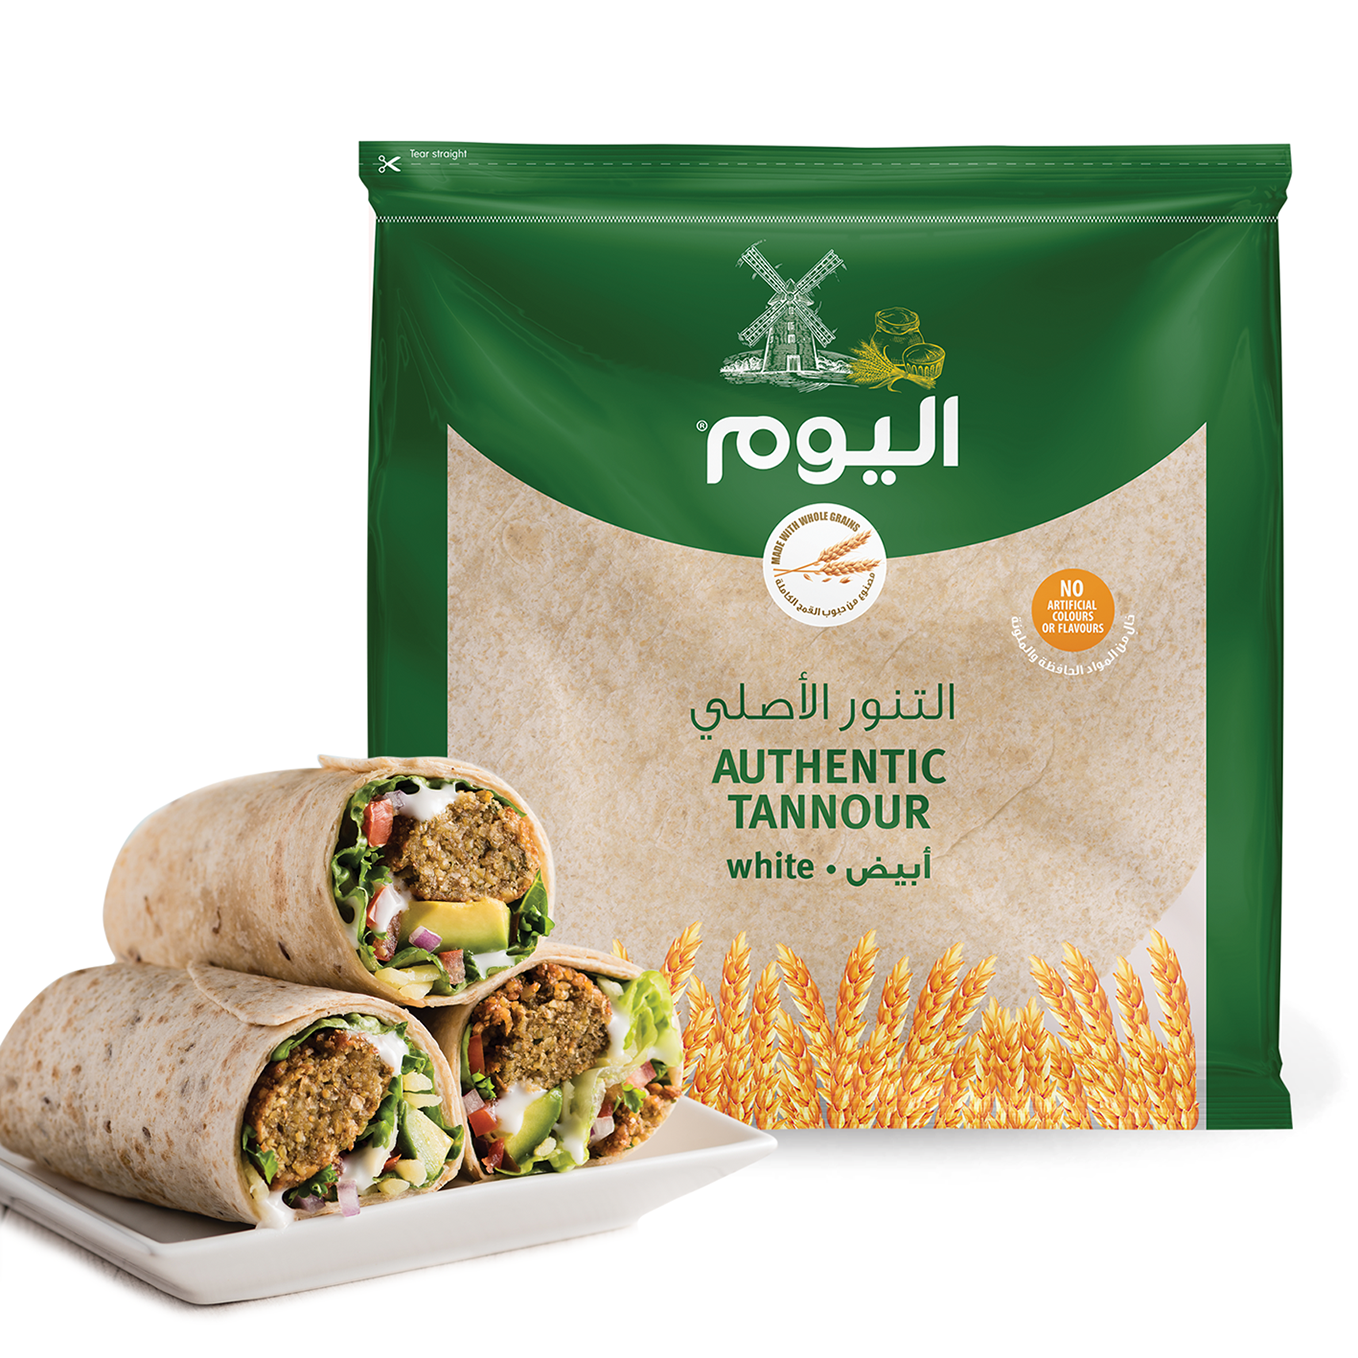 TANNOUR PRODUCT CATEGORY